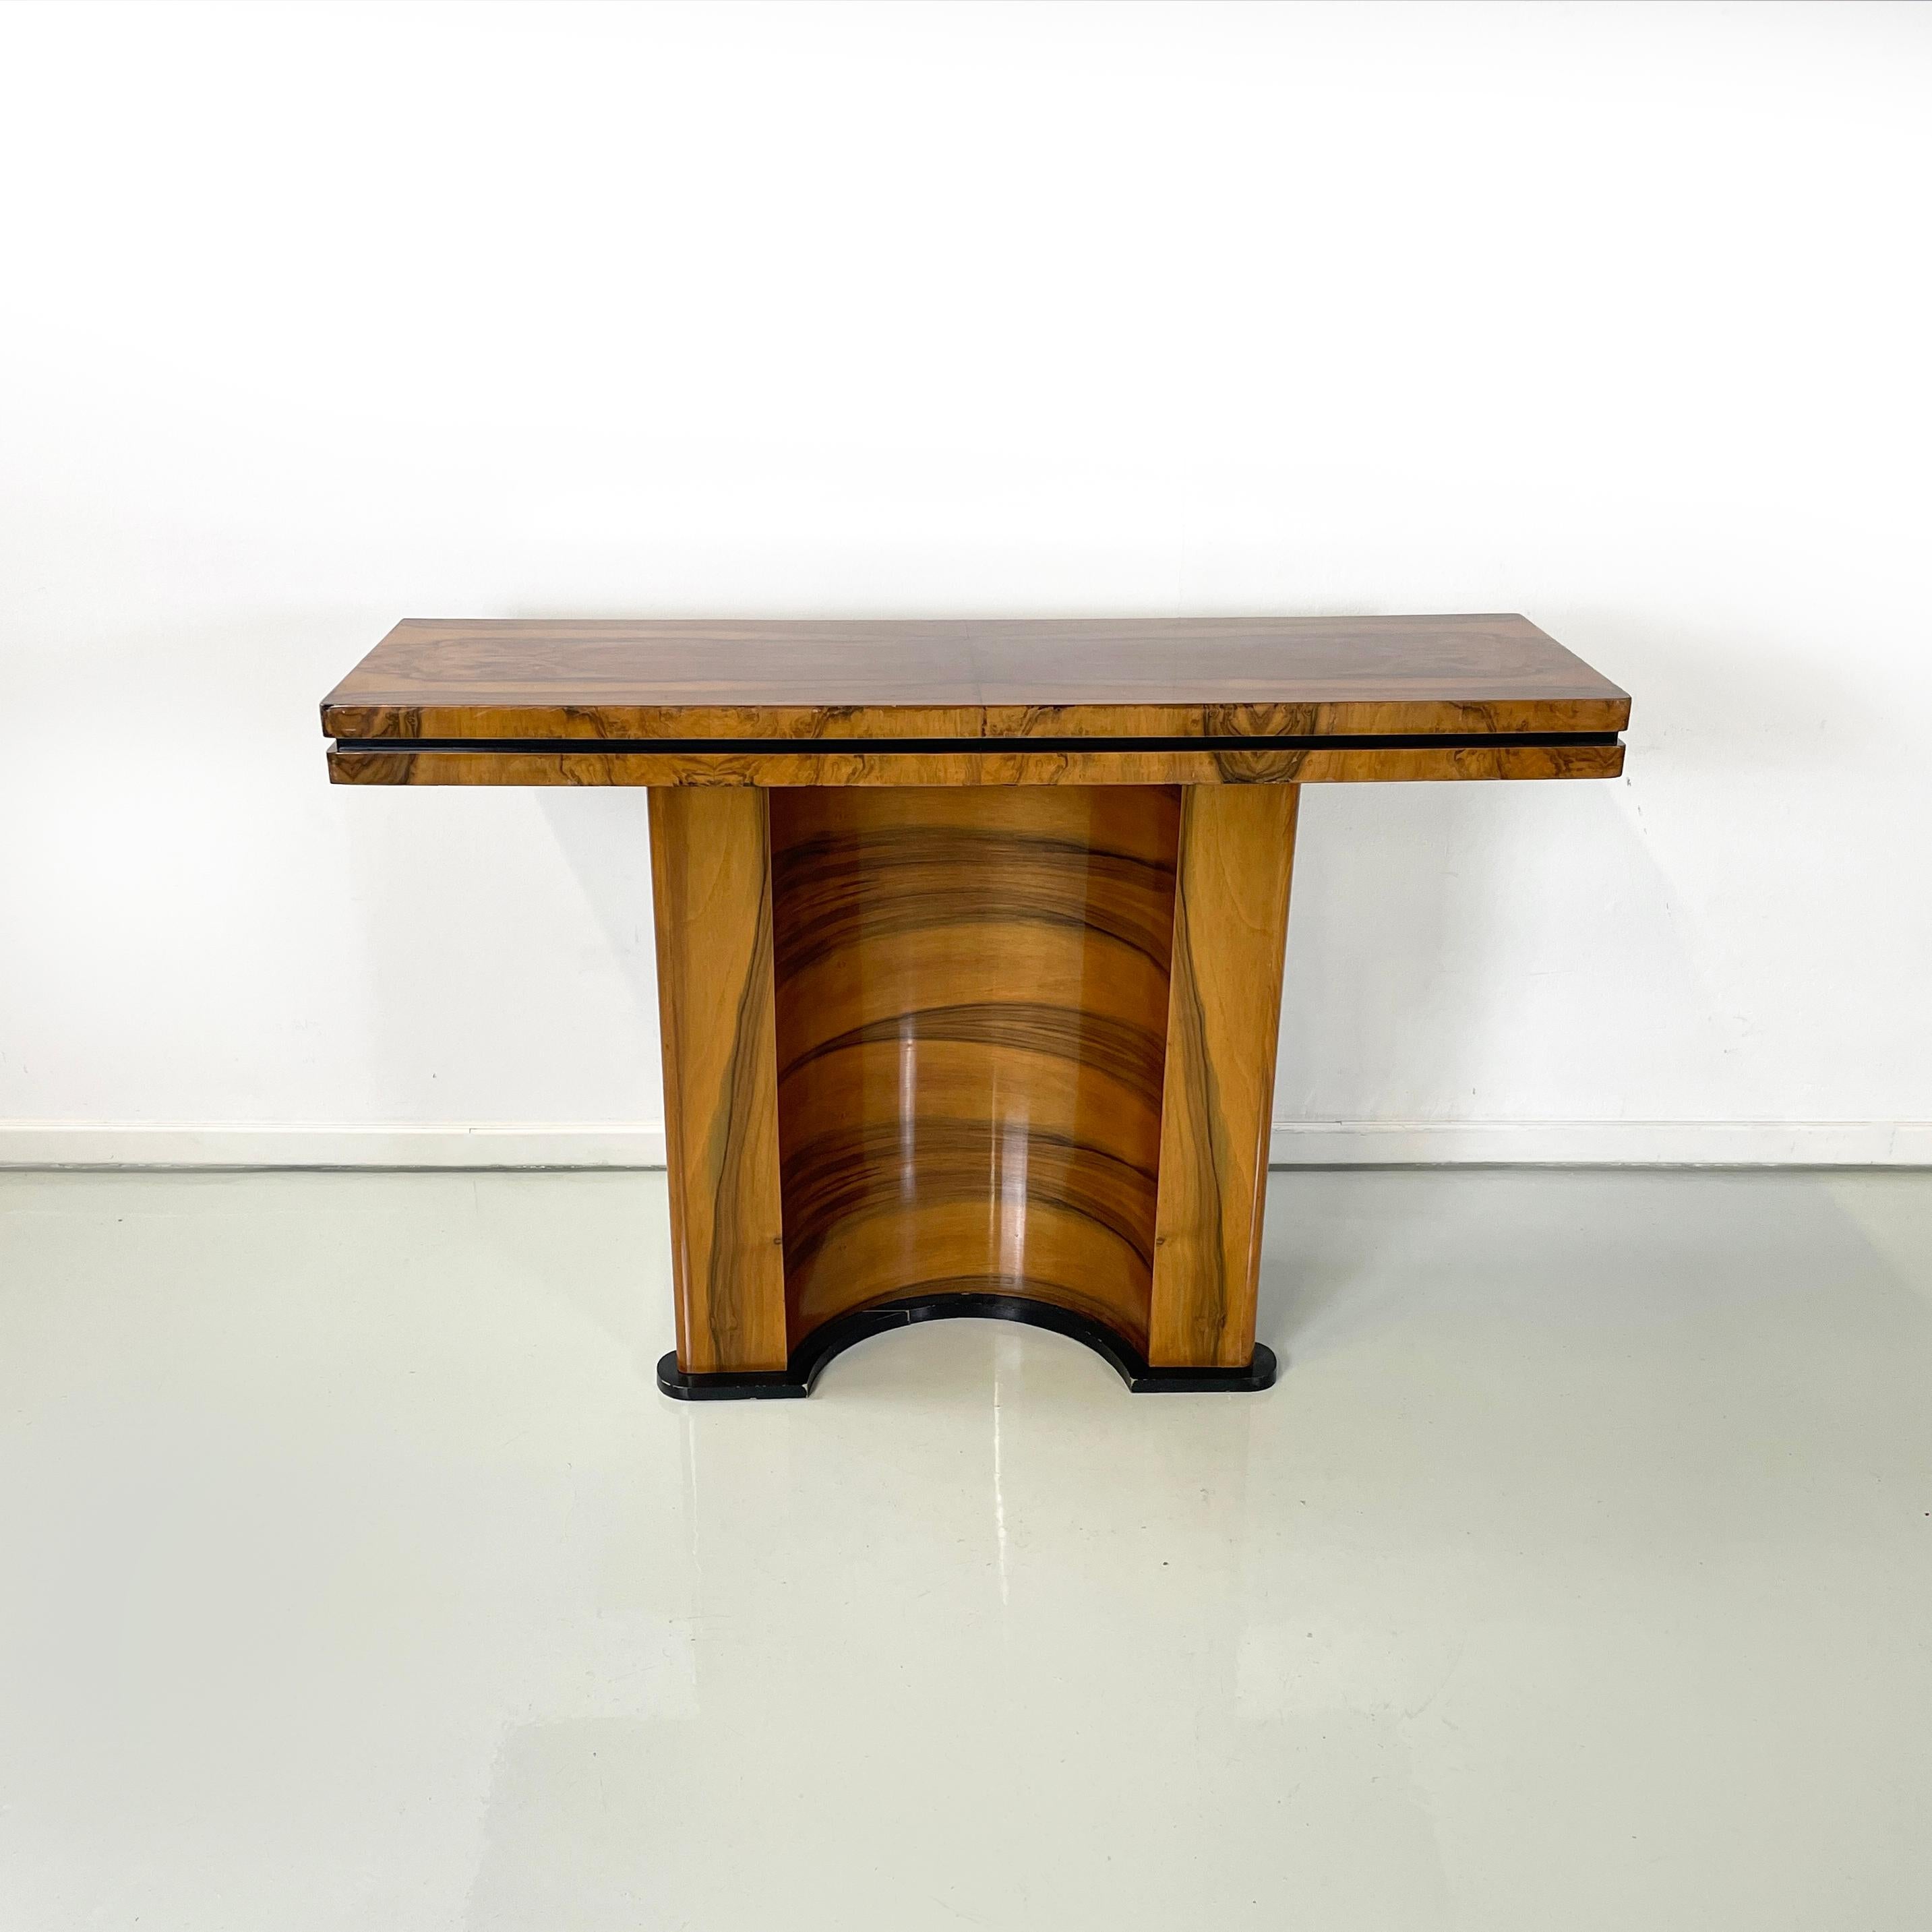 Italian modern Wooden rectangular console with black wood details, 1970s
Console table with rectangular top, entirely in wood with glossy finish. The top has a front with rounded corners and a decorative recess in black painted wood in the center.